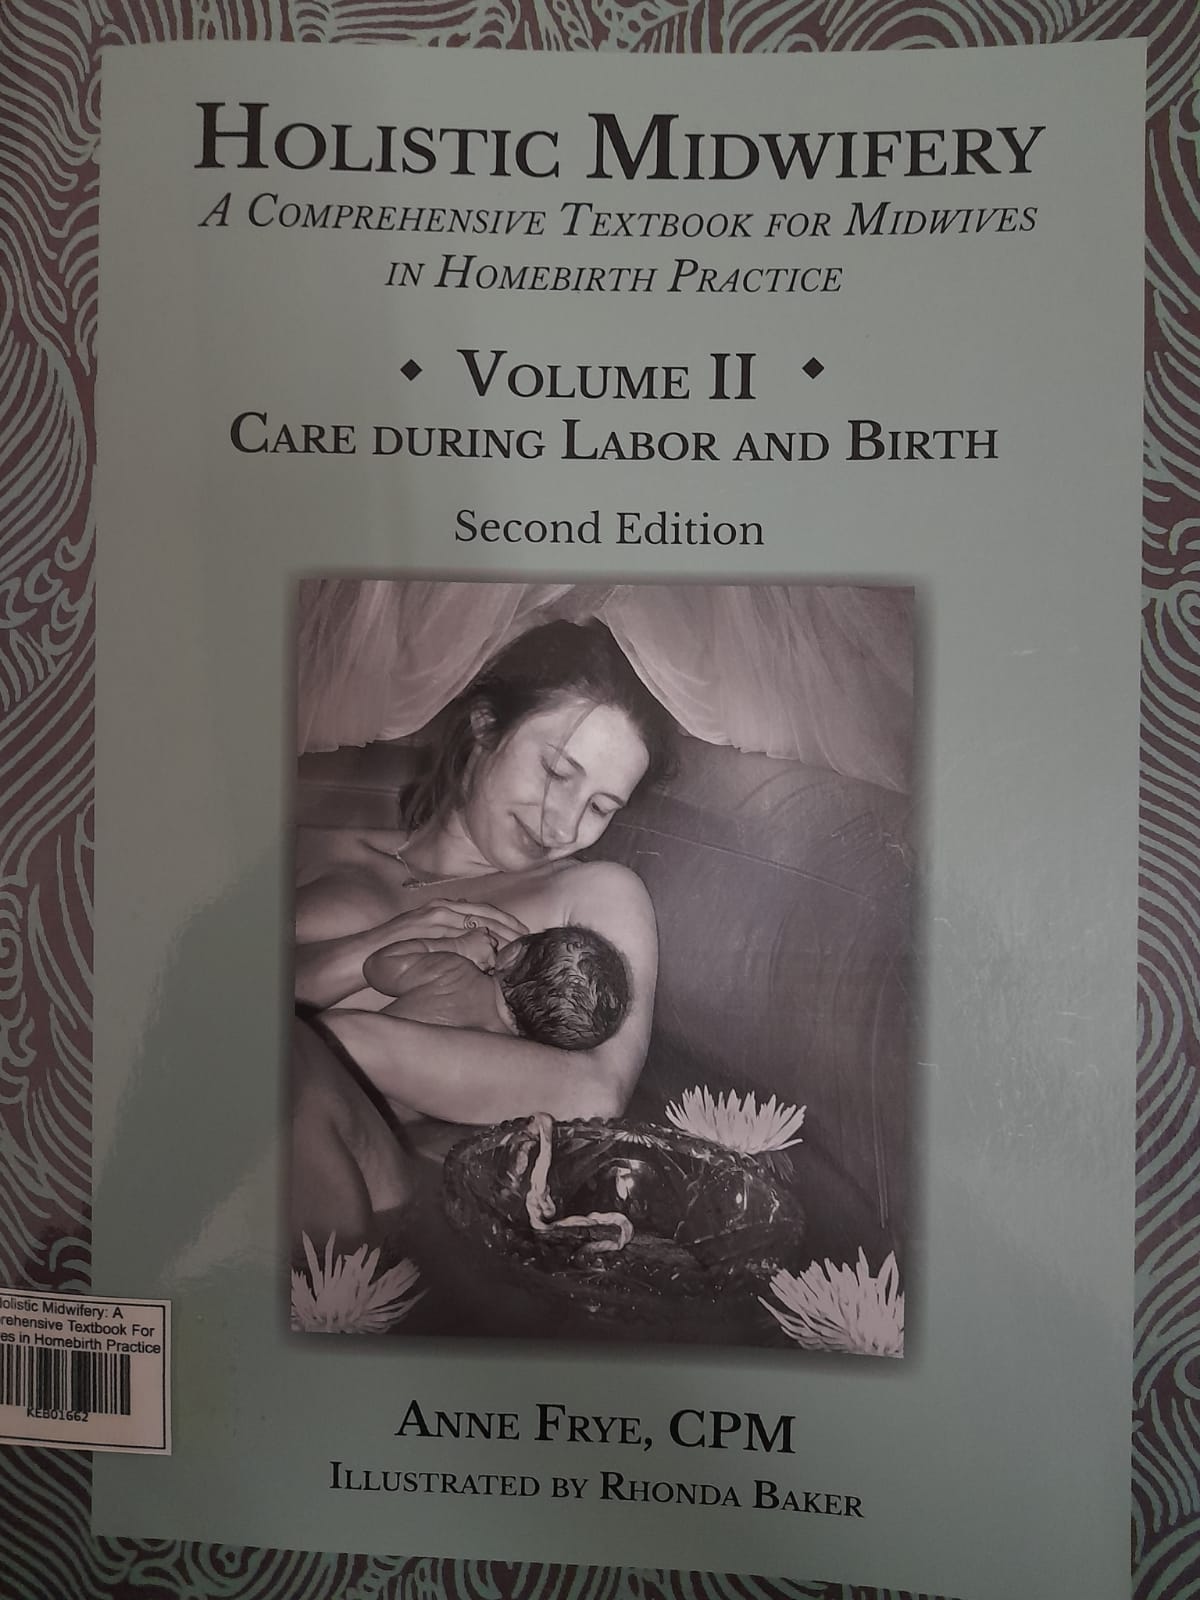 Holistic Midwifery: A Comprehensive Textbook For Midwives in Homebirth Practice Volume II Care During Labor and Birth